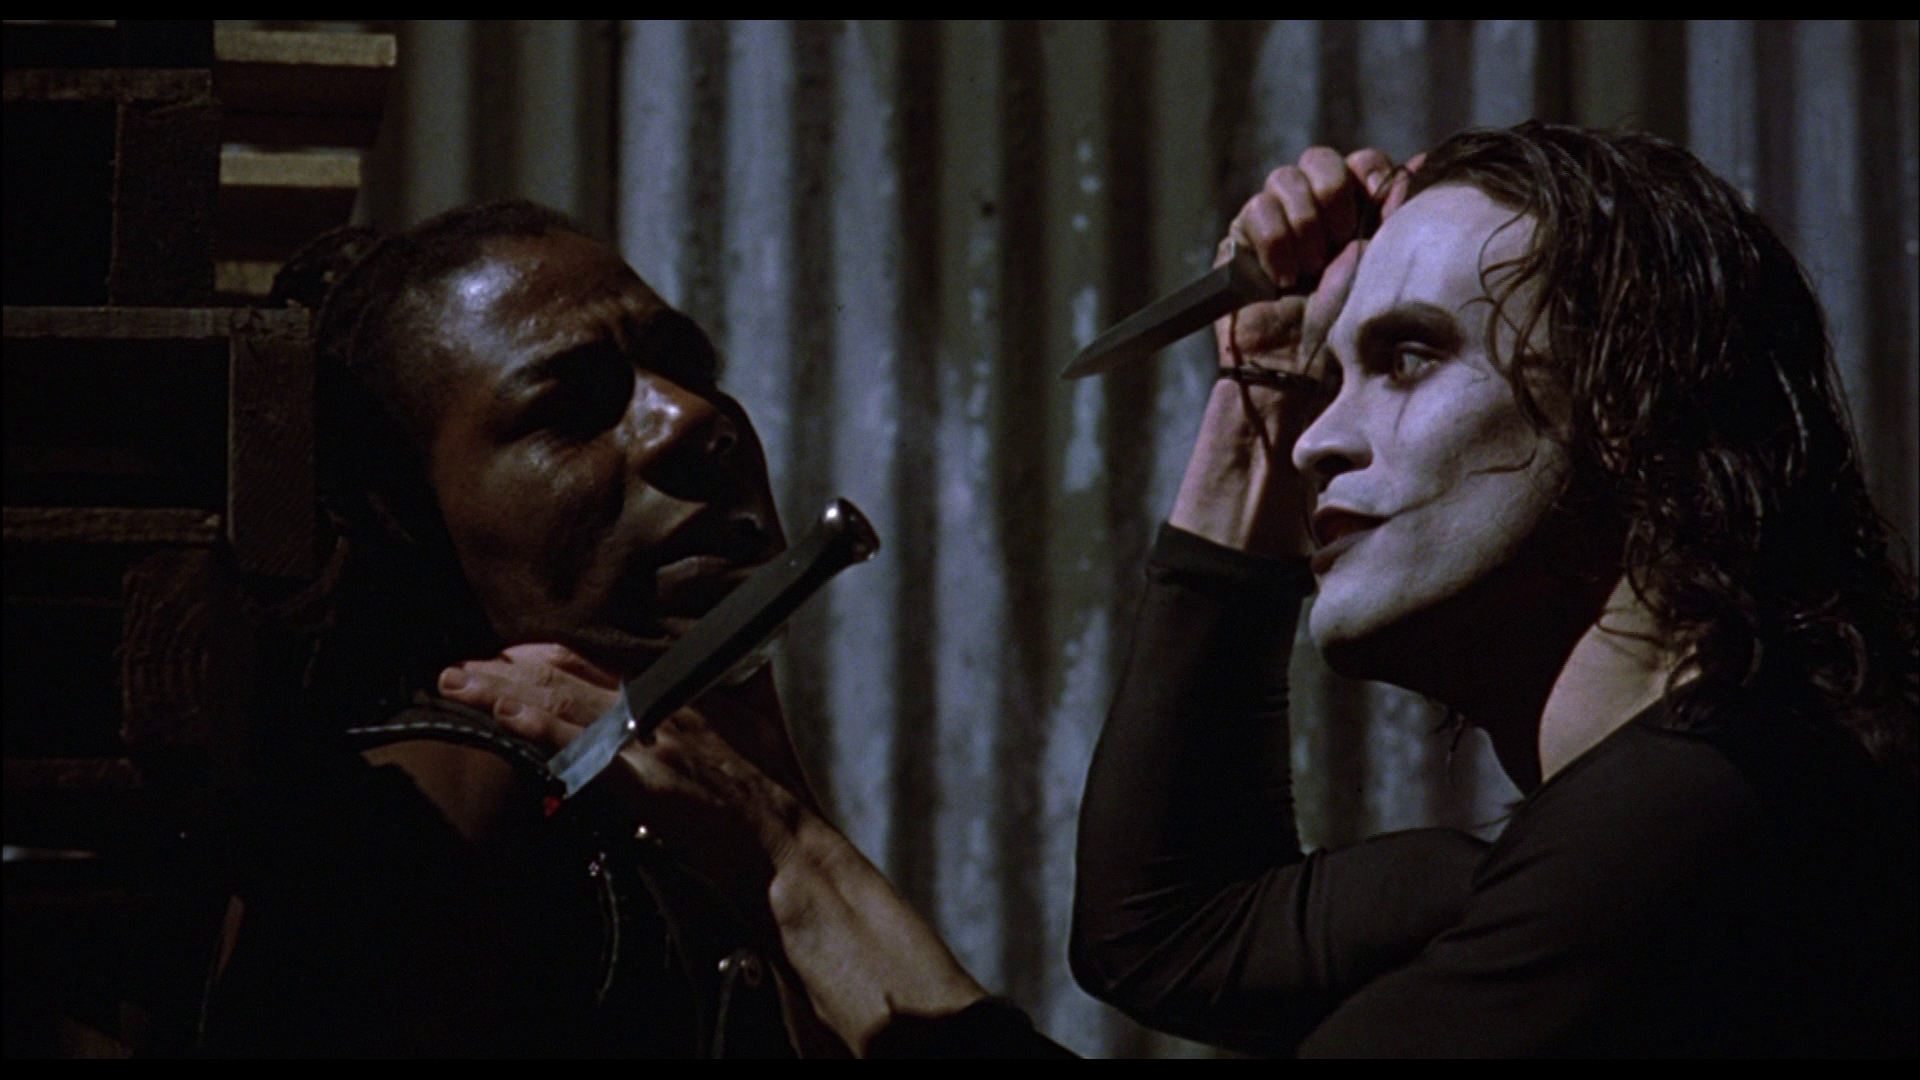 Laurence Mason as Tin Tin and Brandon Lee as Eric Draven in Alex Proyas' The Crow